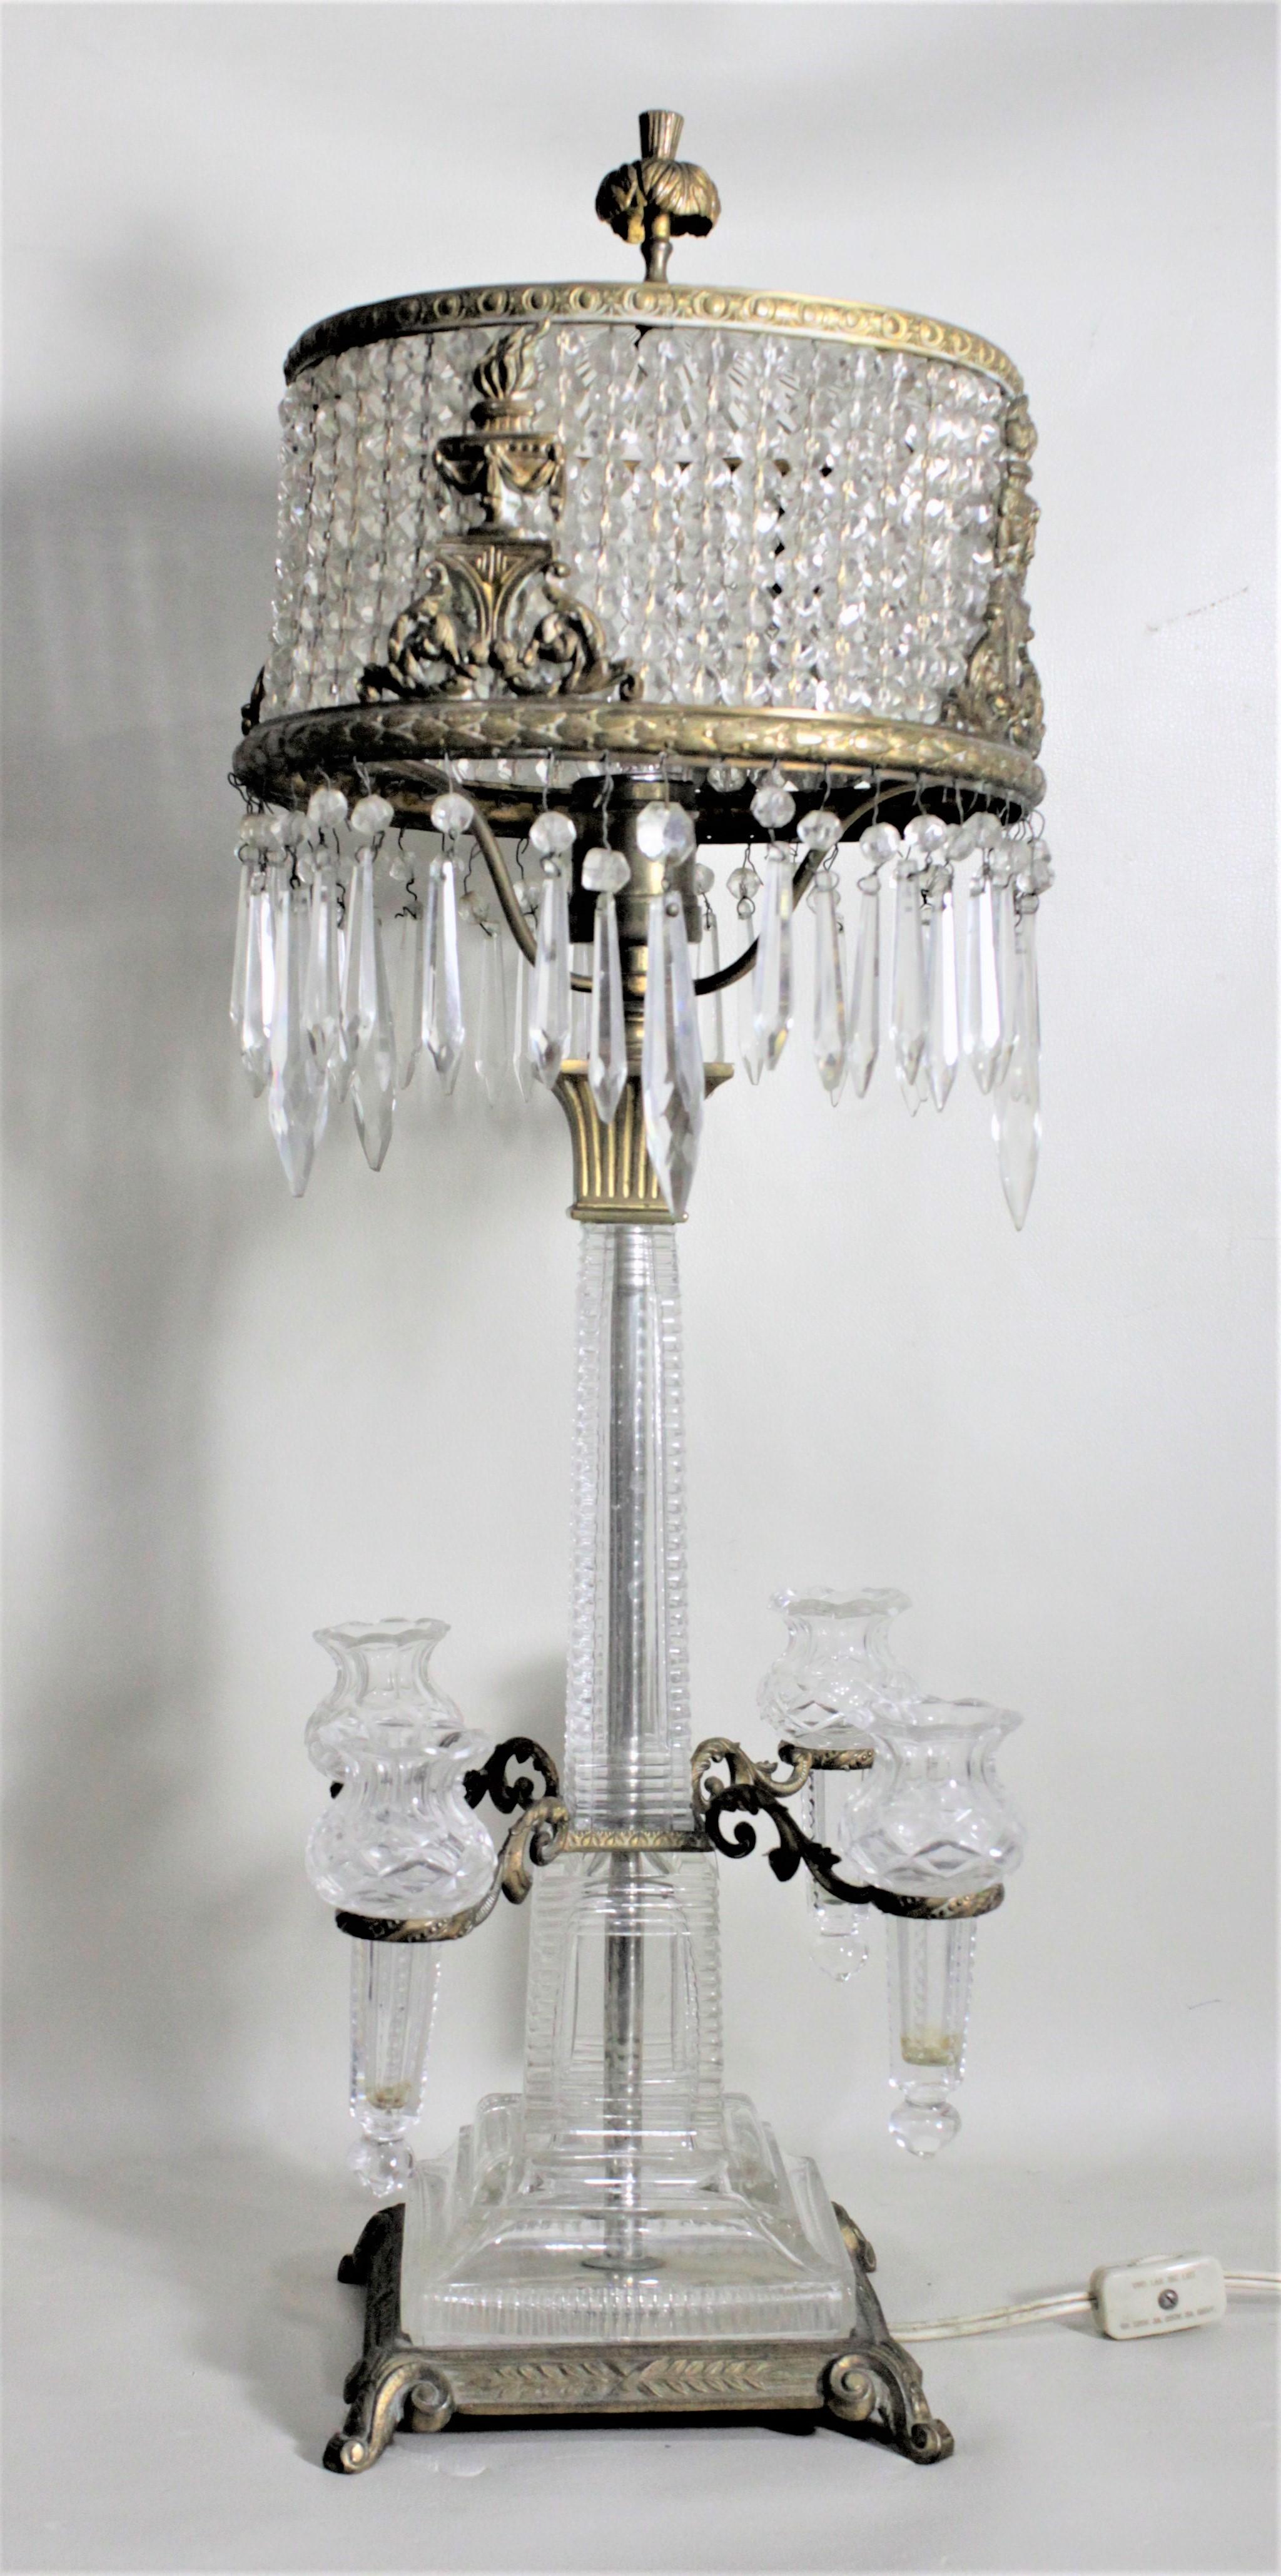 Hand-Crafted Antique Austrian Crystal & Gilt Metal Table Lamp with an Epergne or Bud Vases For Sale